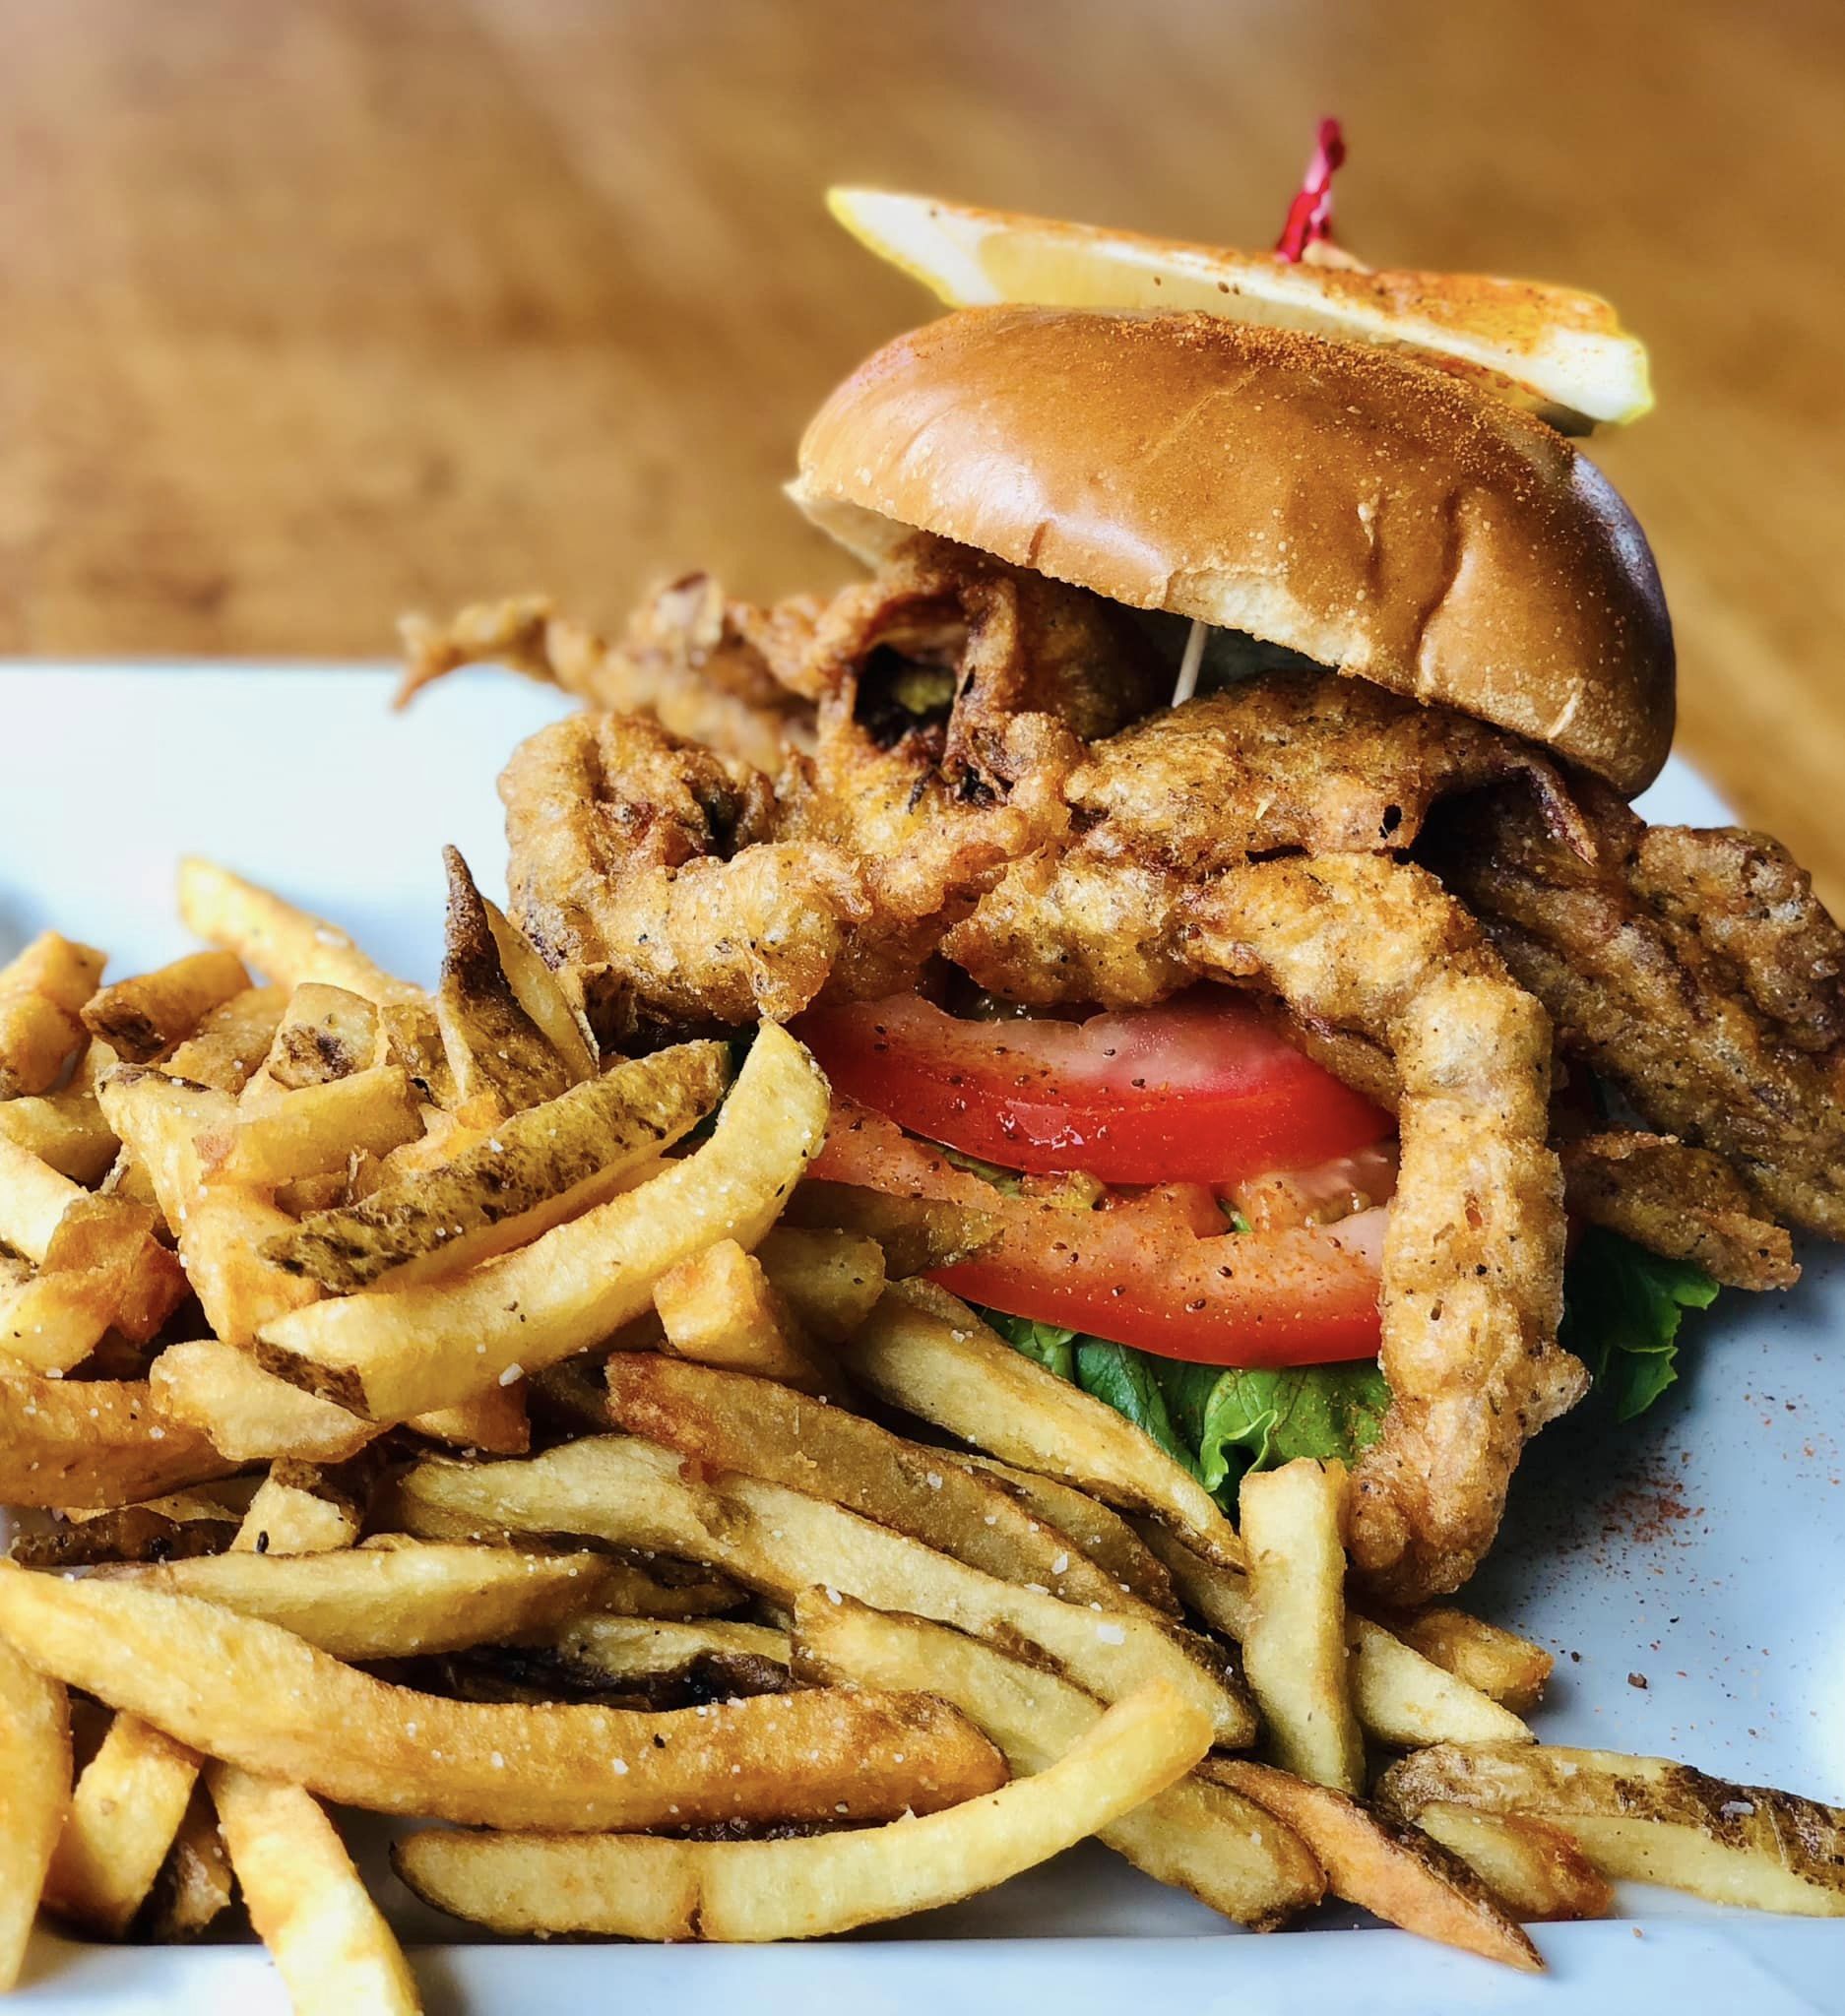 a soft shell crab sandwich with fries